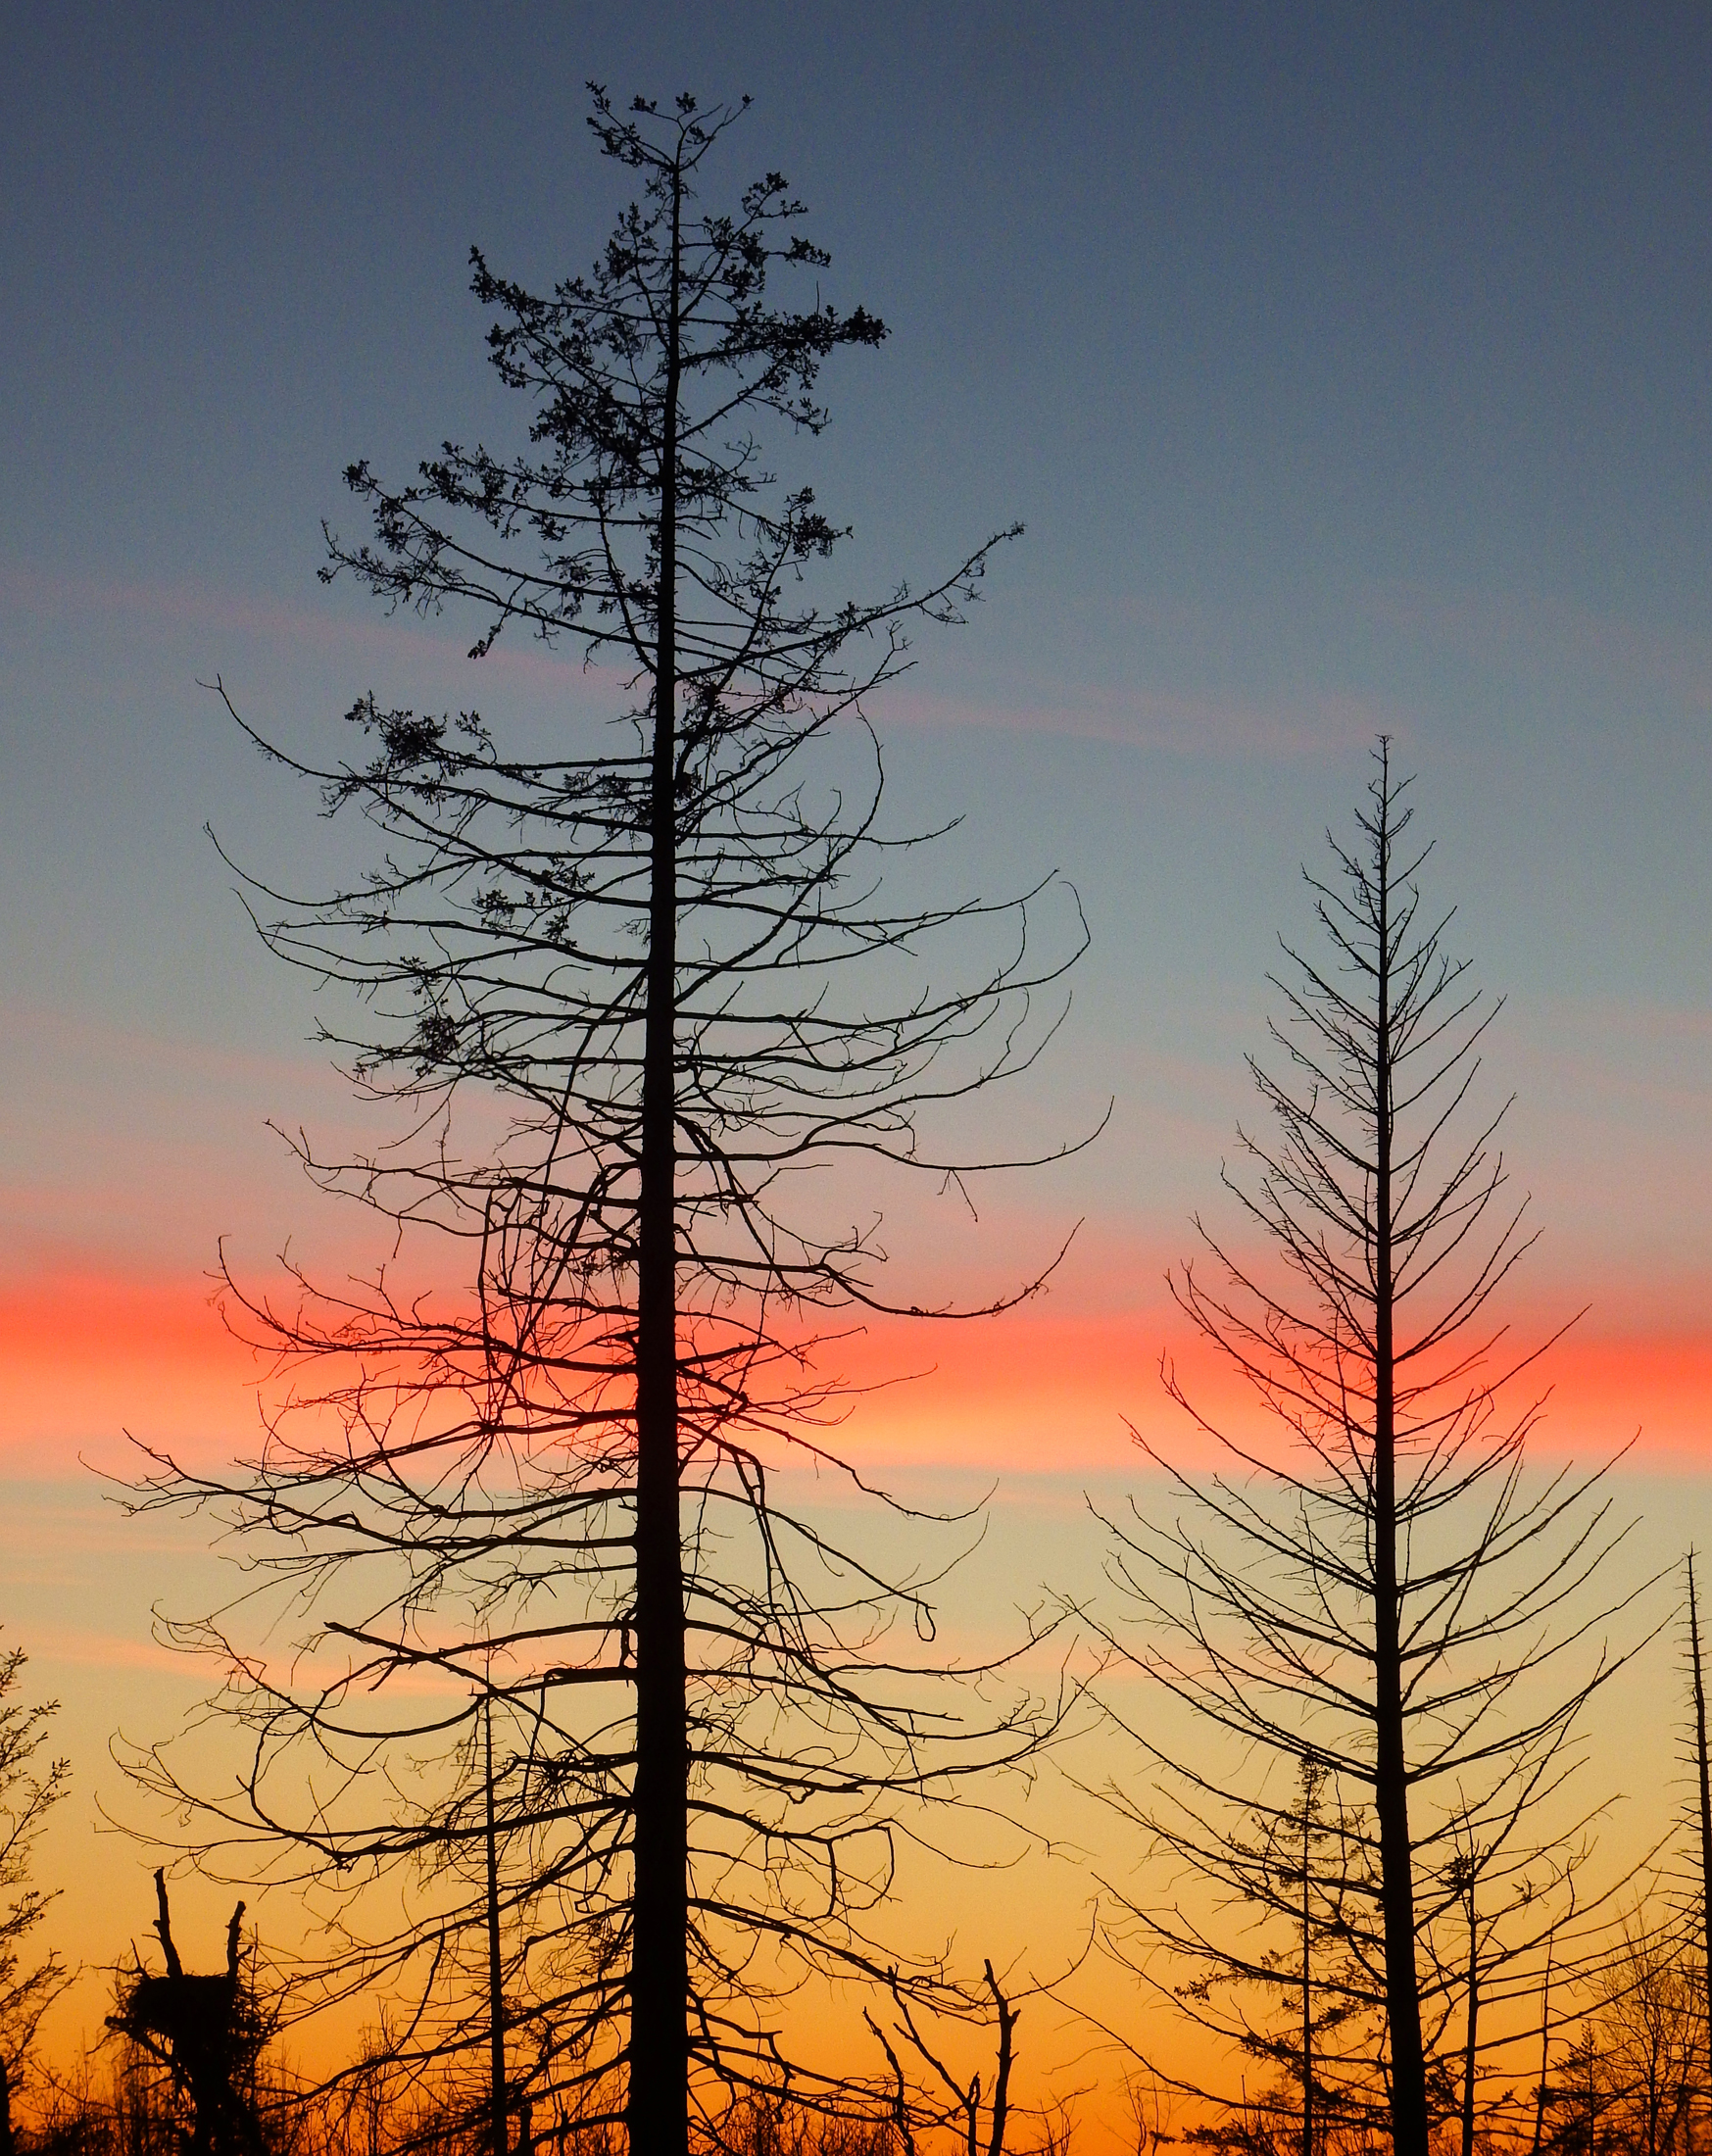 Trees at Sunset, early January, Homer. Photo by Linda Shaw